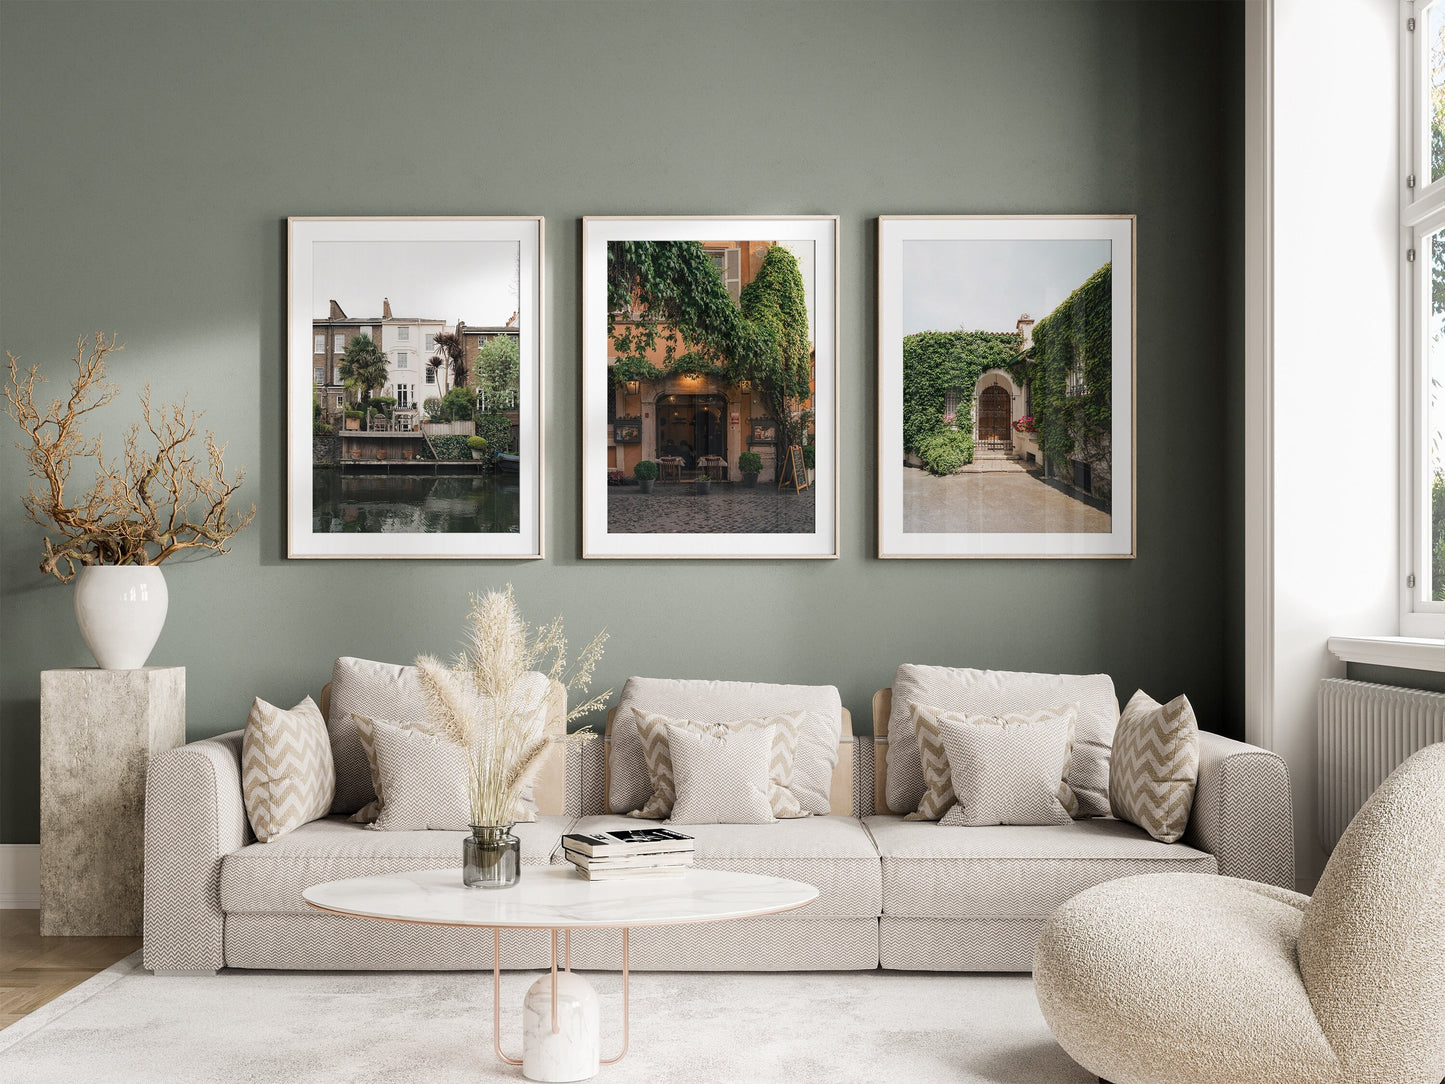 Europe Greenery Wall Decor Matching Photo Set of 3 City Nature Prints European Print Forest Green Wall Art Gift Europe Gallery Set Peaceful